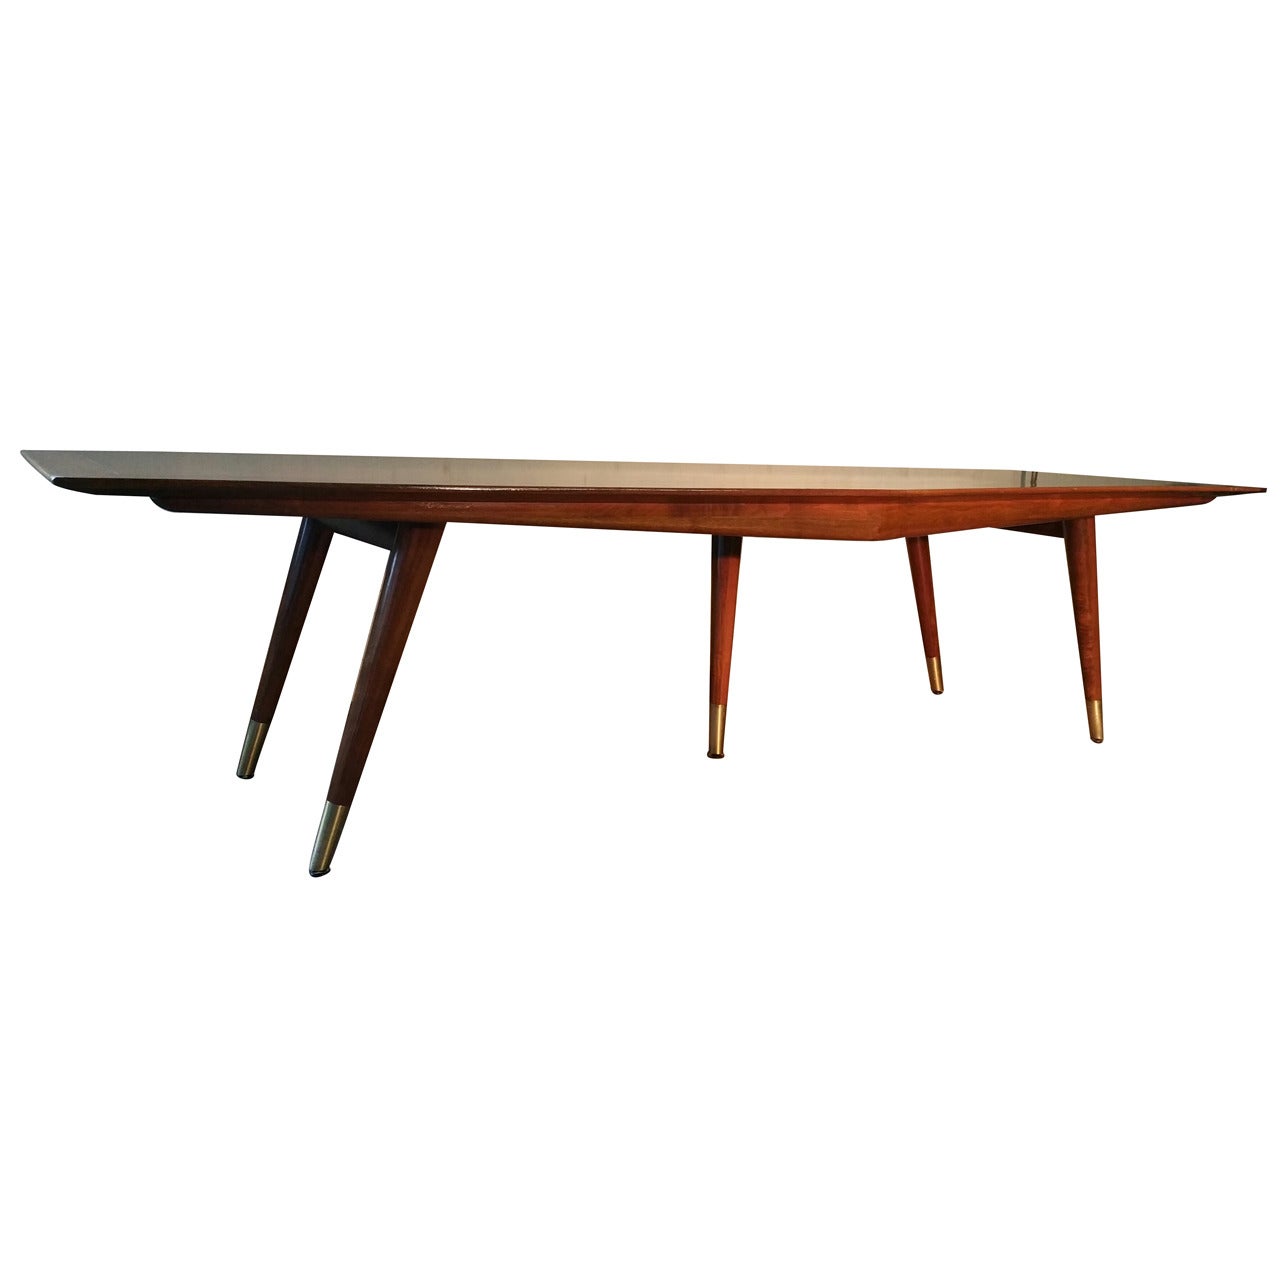 Monumental Conference or Dining Table byStow Davis